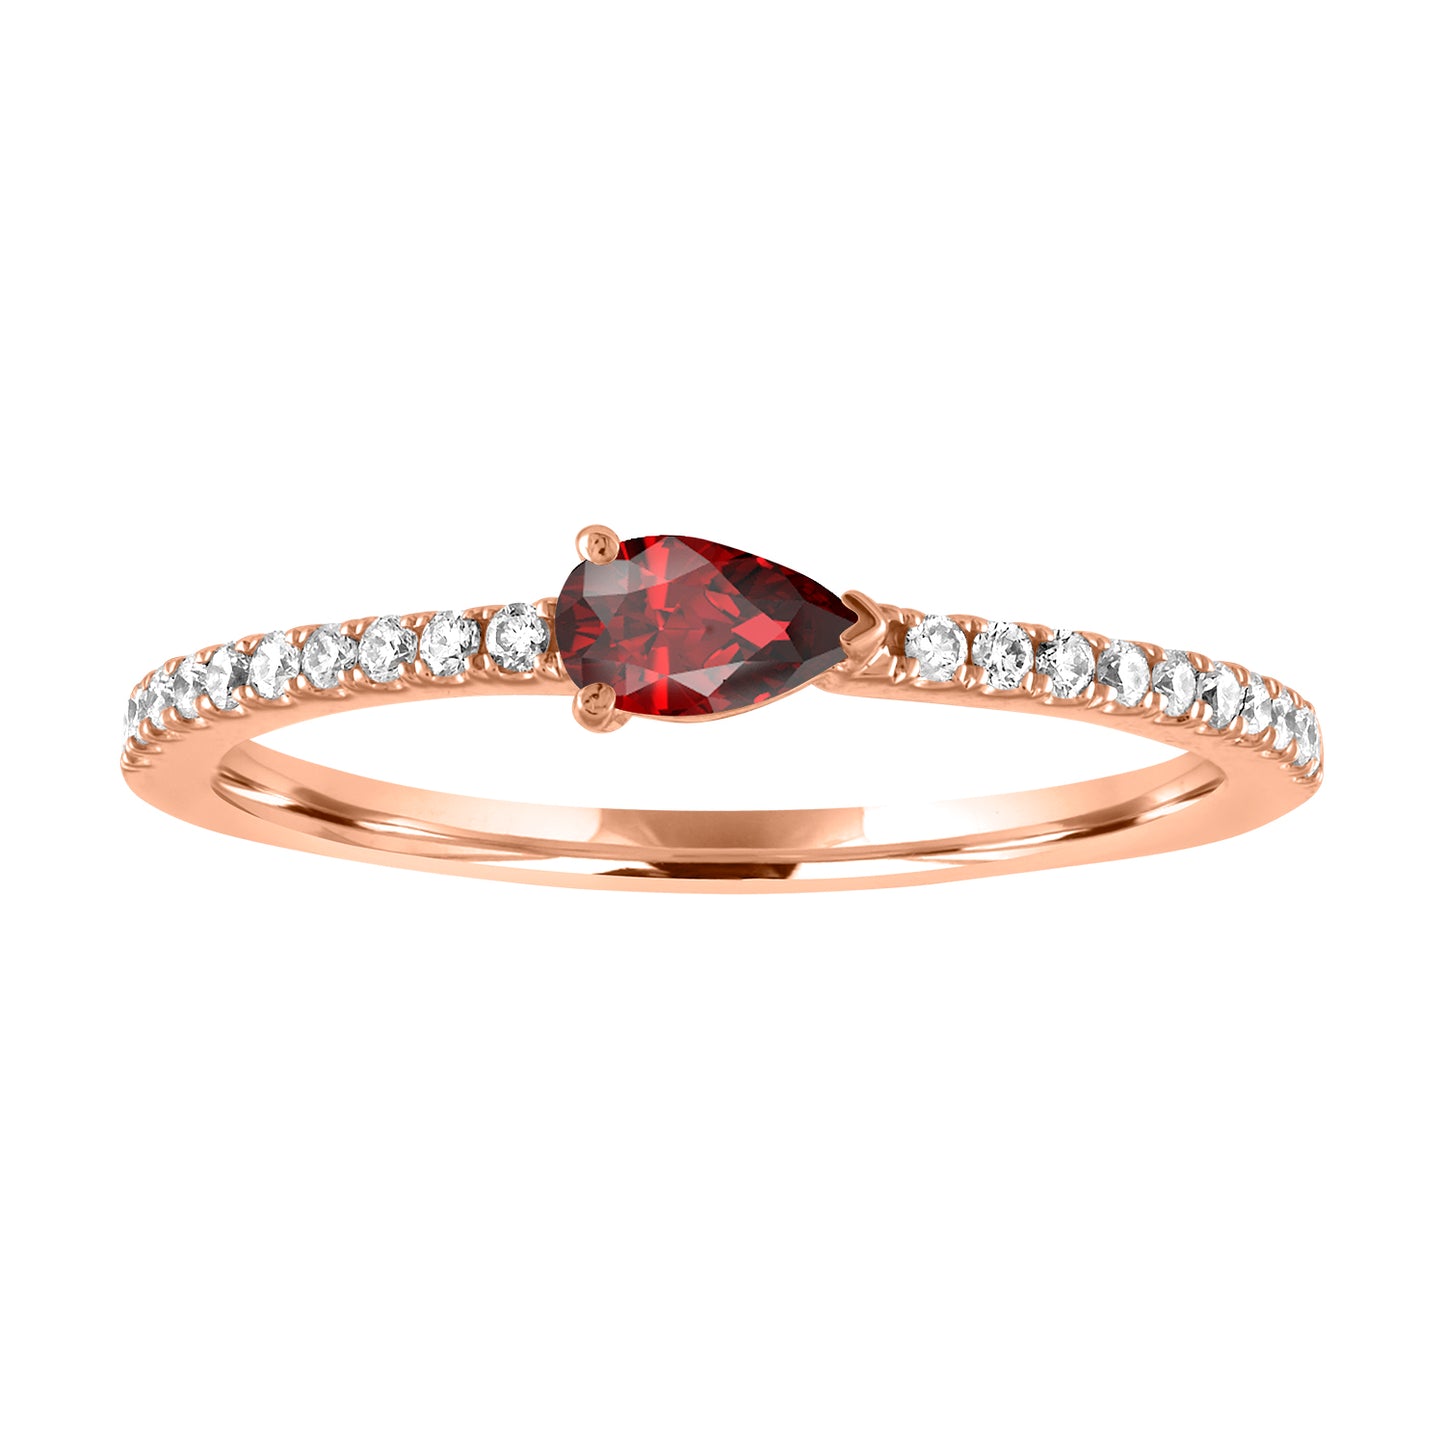 Rose gold skinny band with a pear shaped garnet in the center and round diamonds on the shank. 